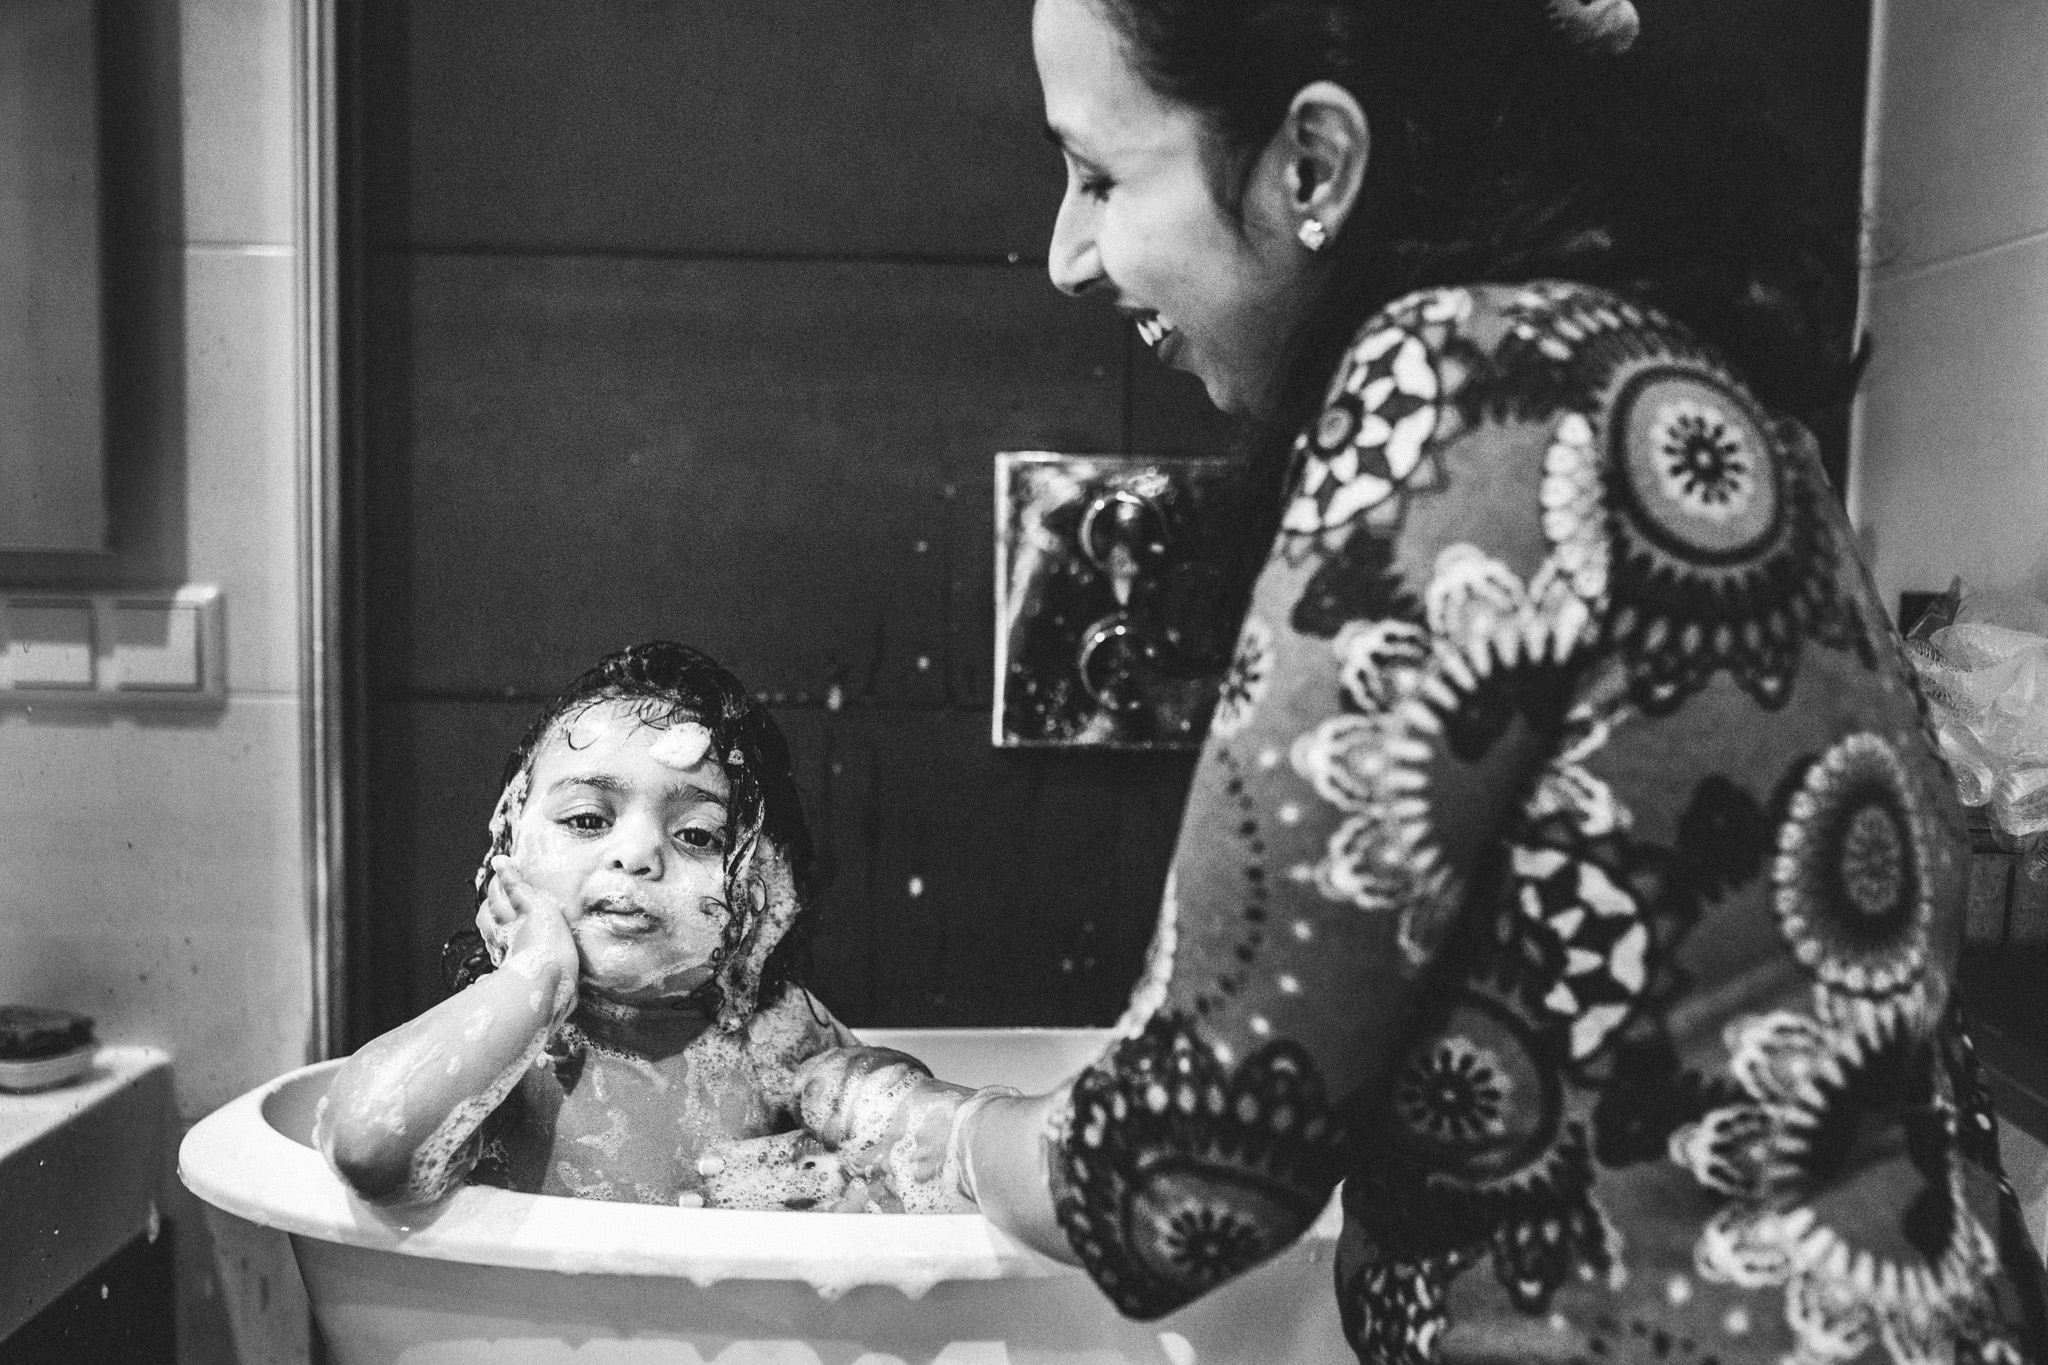 In this black and white picture, a mom is bathing her daughter. The little one is looking at the camera, her face is covered by foam. Her head is resting on her hand.